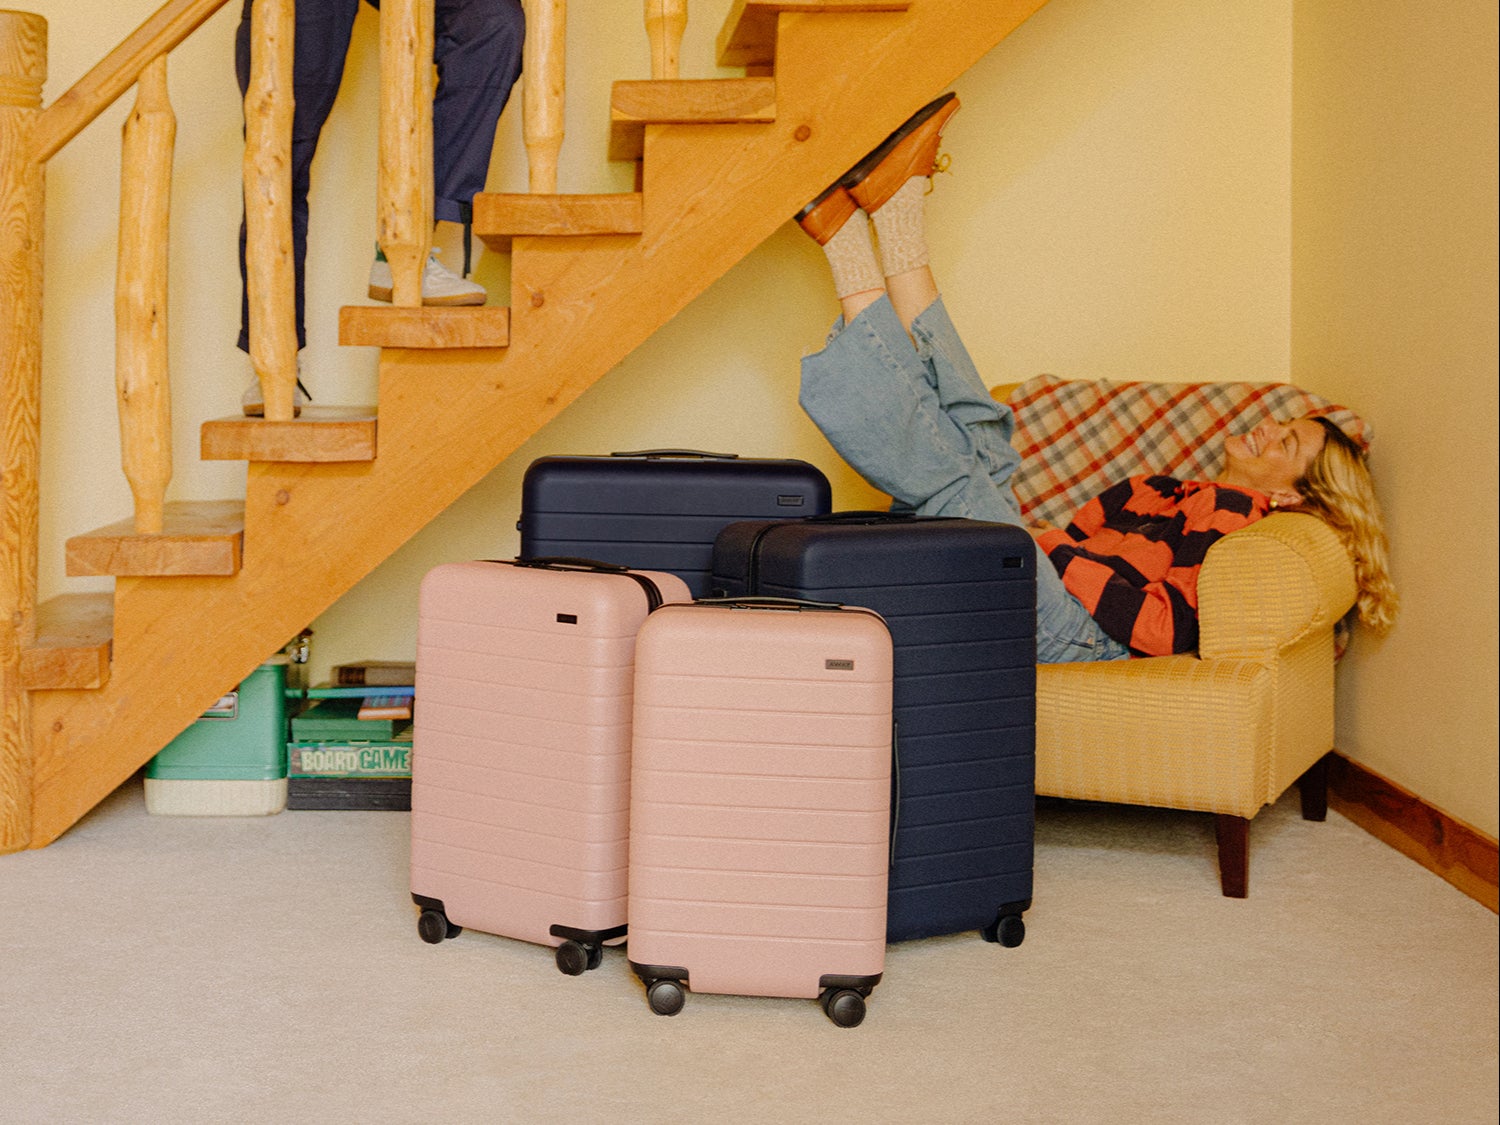 Pack it up: Away’s luggage balances style and substance